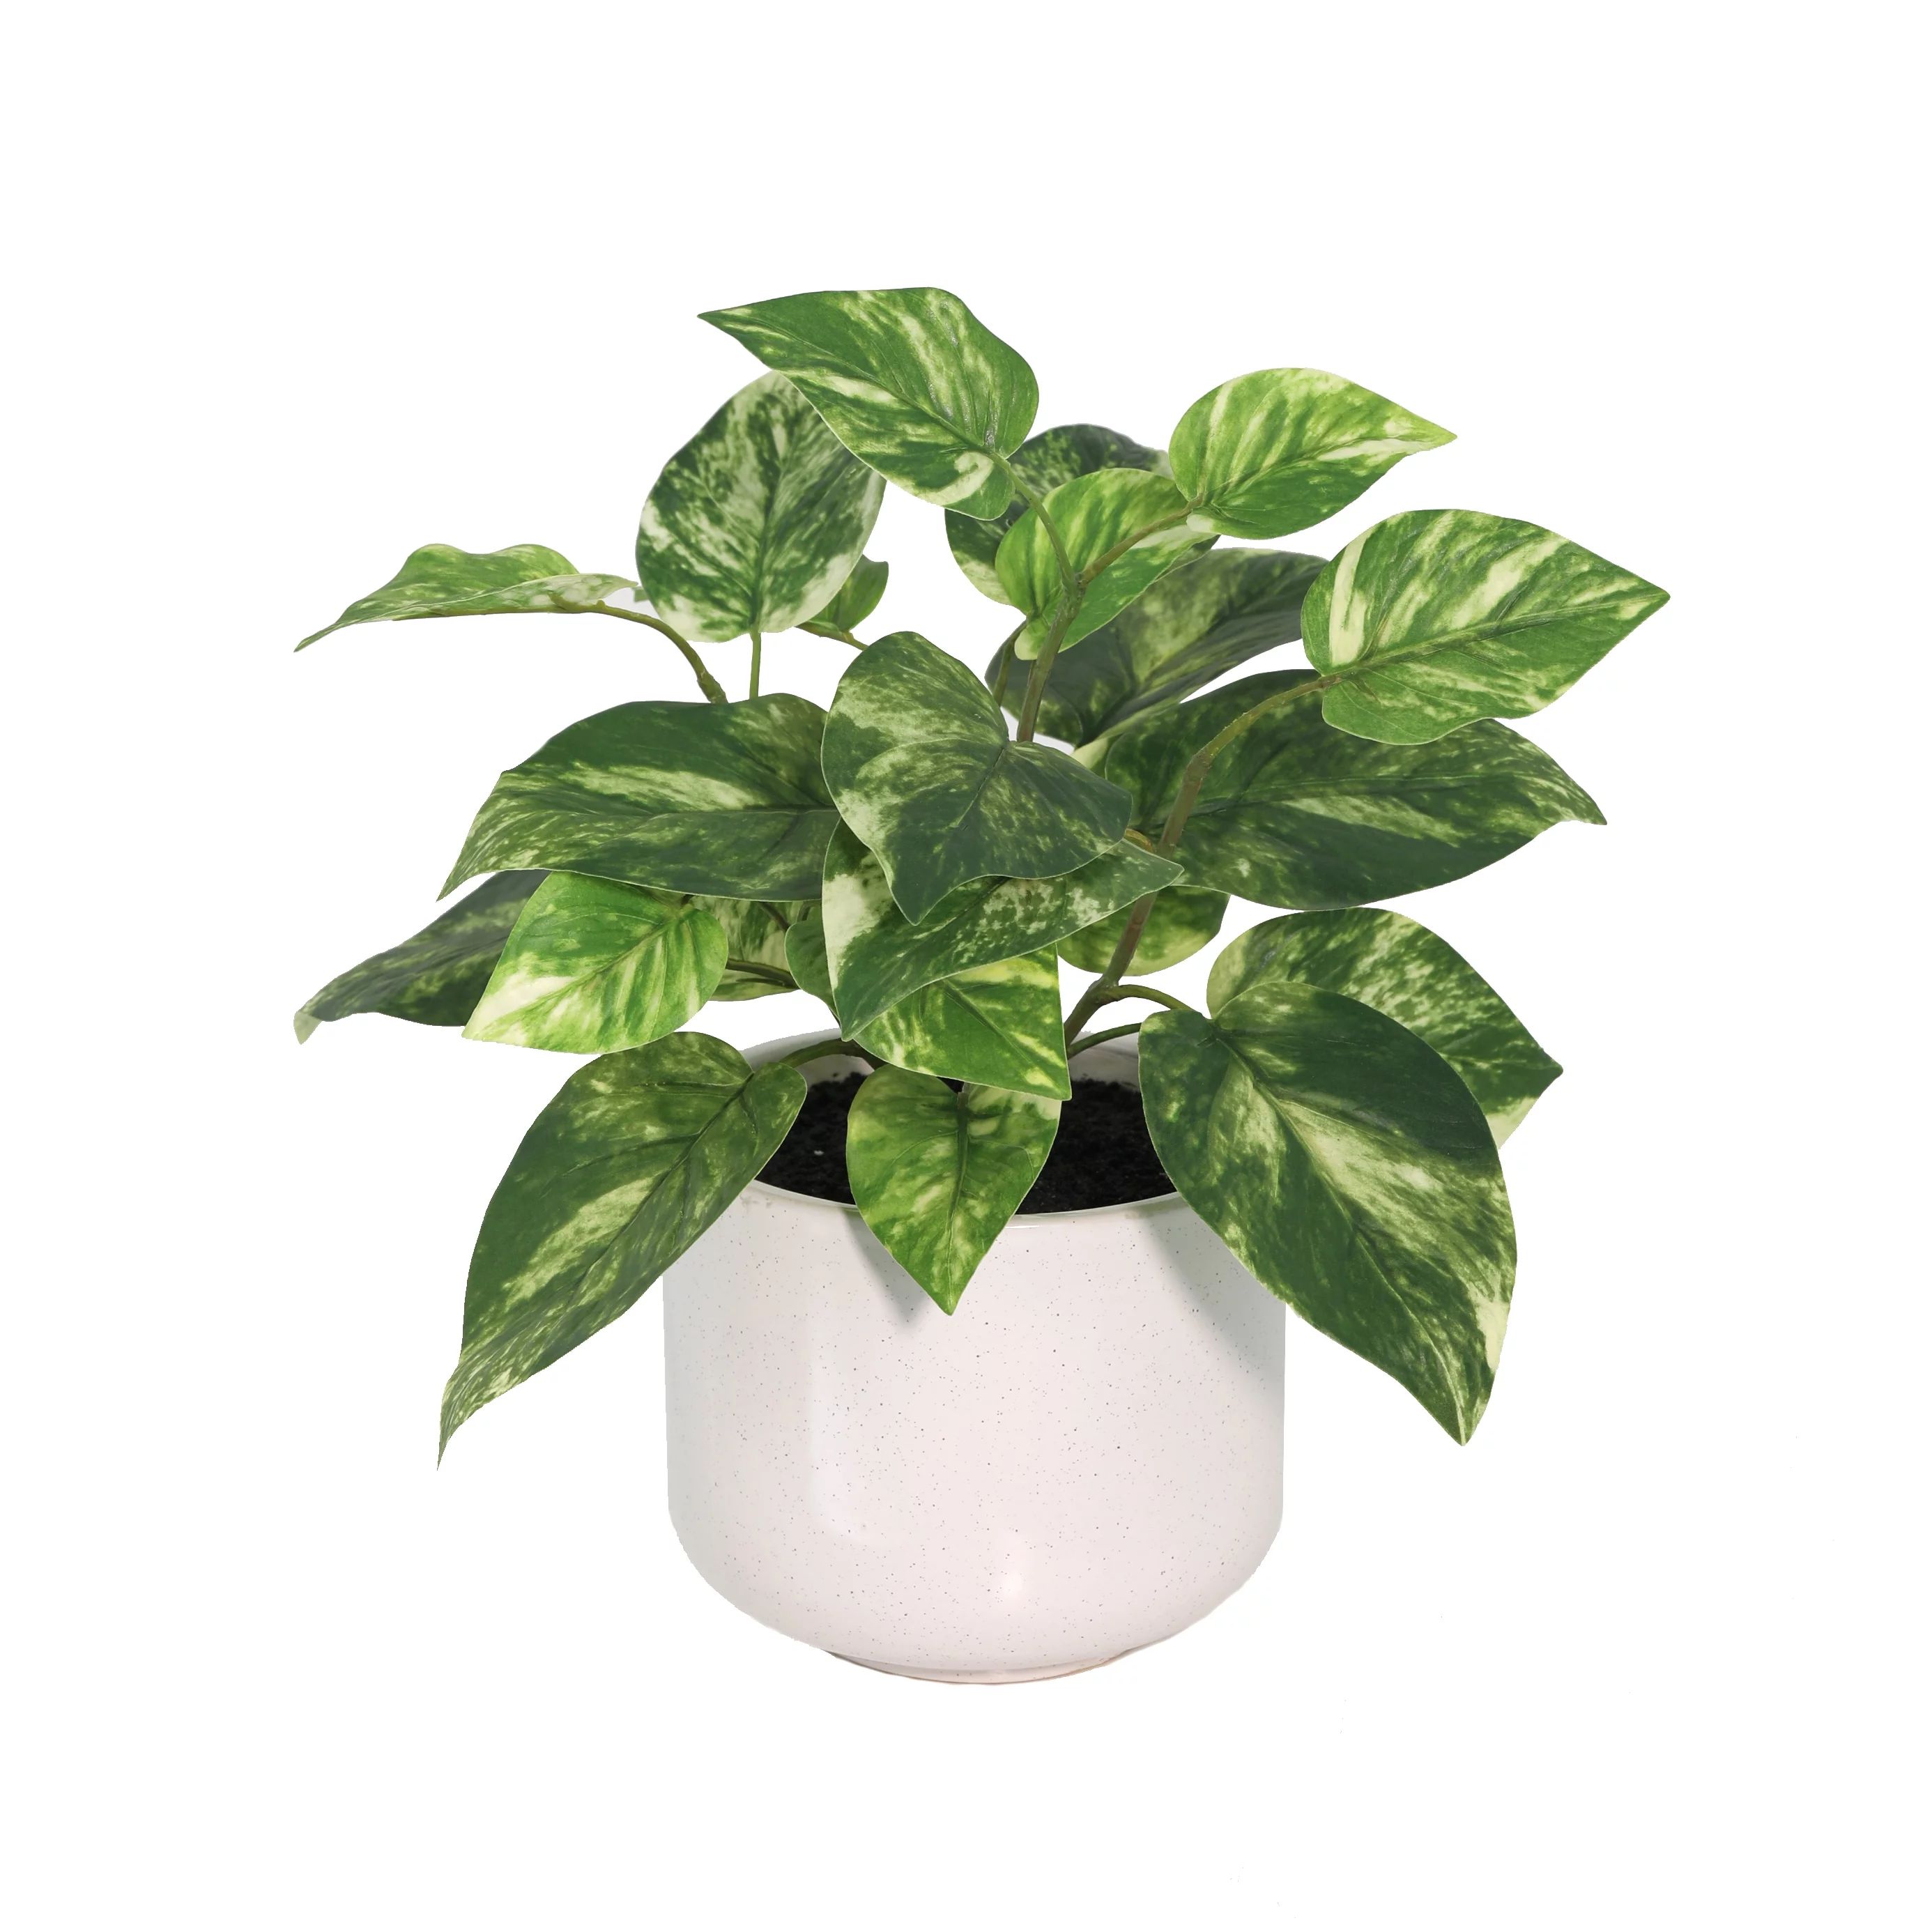 Mainstays Height 12" Tall Artificial Plant in Green Color, Potted Plant Pothos in White Ceramic P... | Walmart (US)